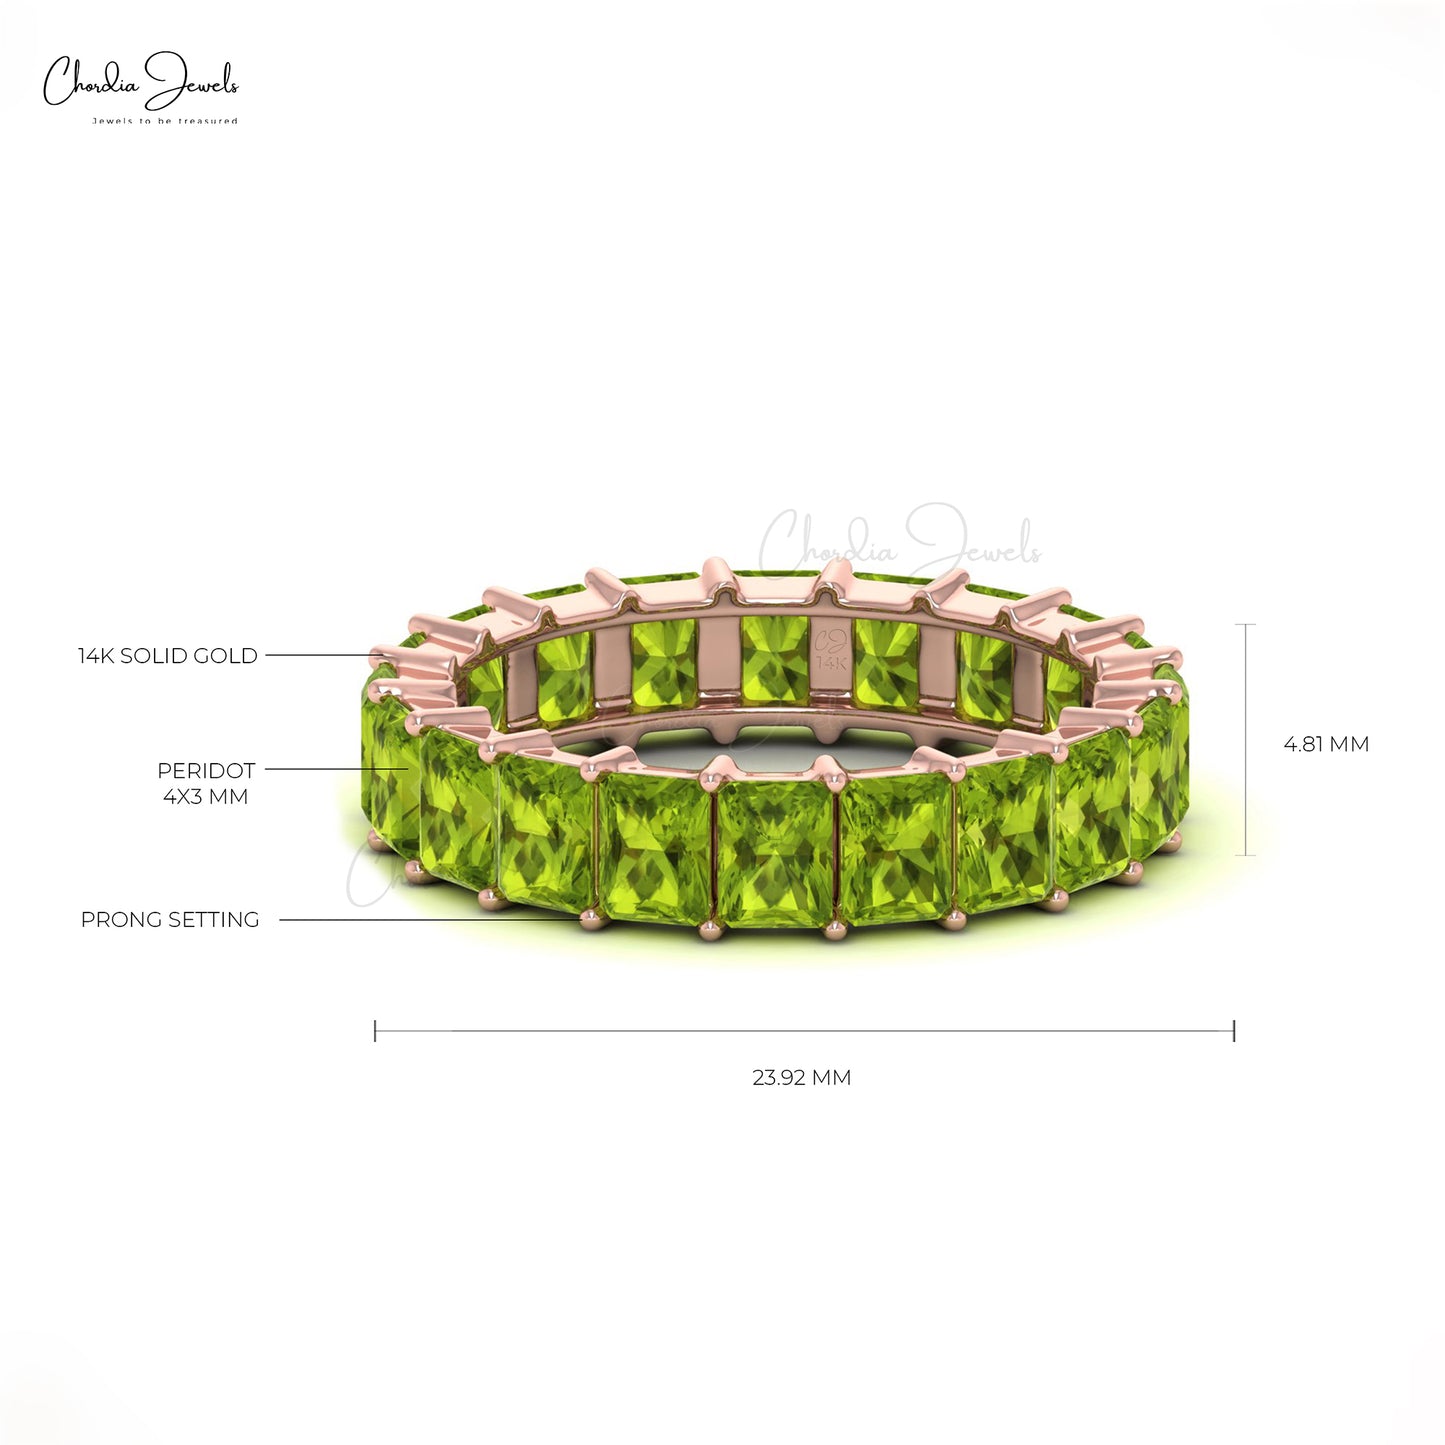 August Birtstone 4.4 Carats Emerald Cut Natural Peridot Full Eternity Band Ring in 14k Solid Gold